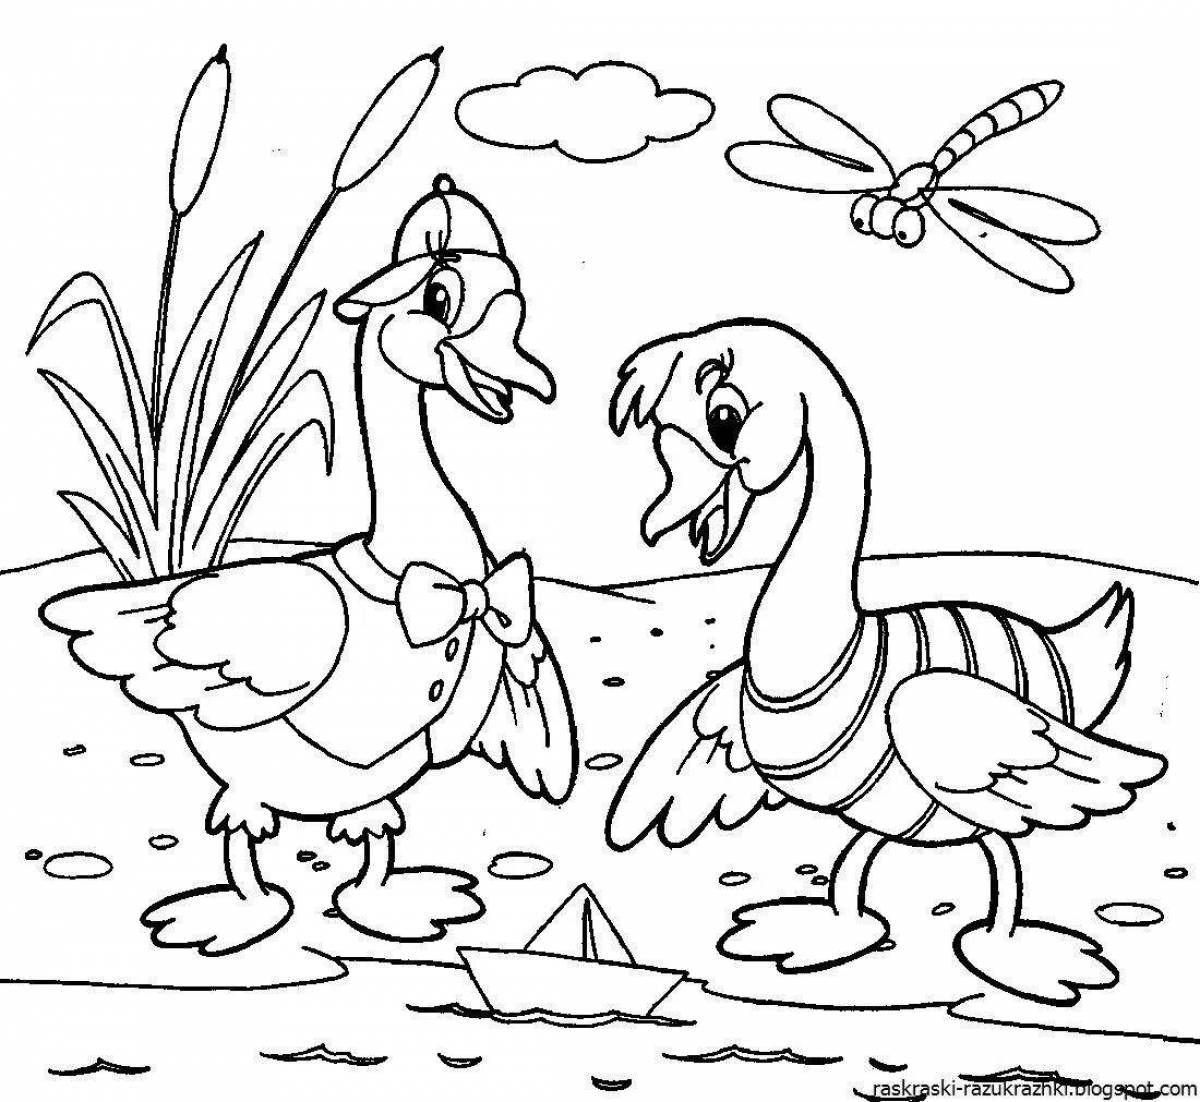 Fun goose coloring book for kids 6-7 years old